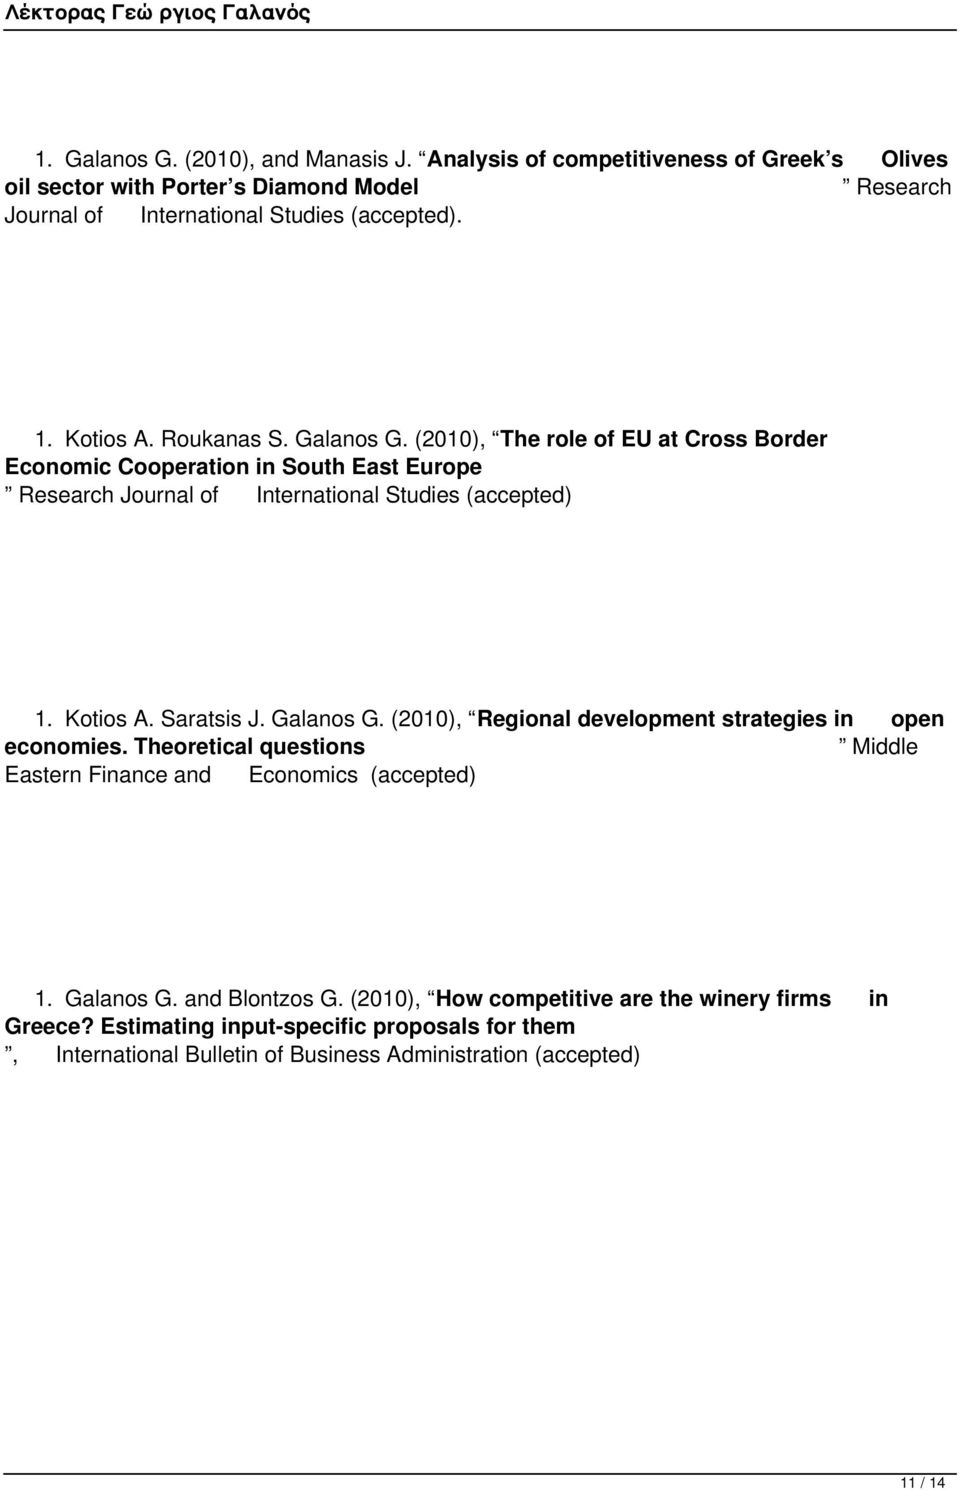 Kotios A. Saratsis J. Galanos G. (2010), Regional development strategies in open economies. Theoretical questions Middle Eastern Finance and Economics (accepted) 1. Galanos G. and Blontzos G.